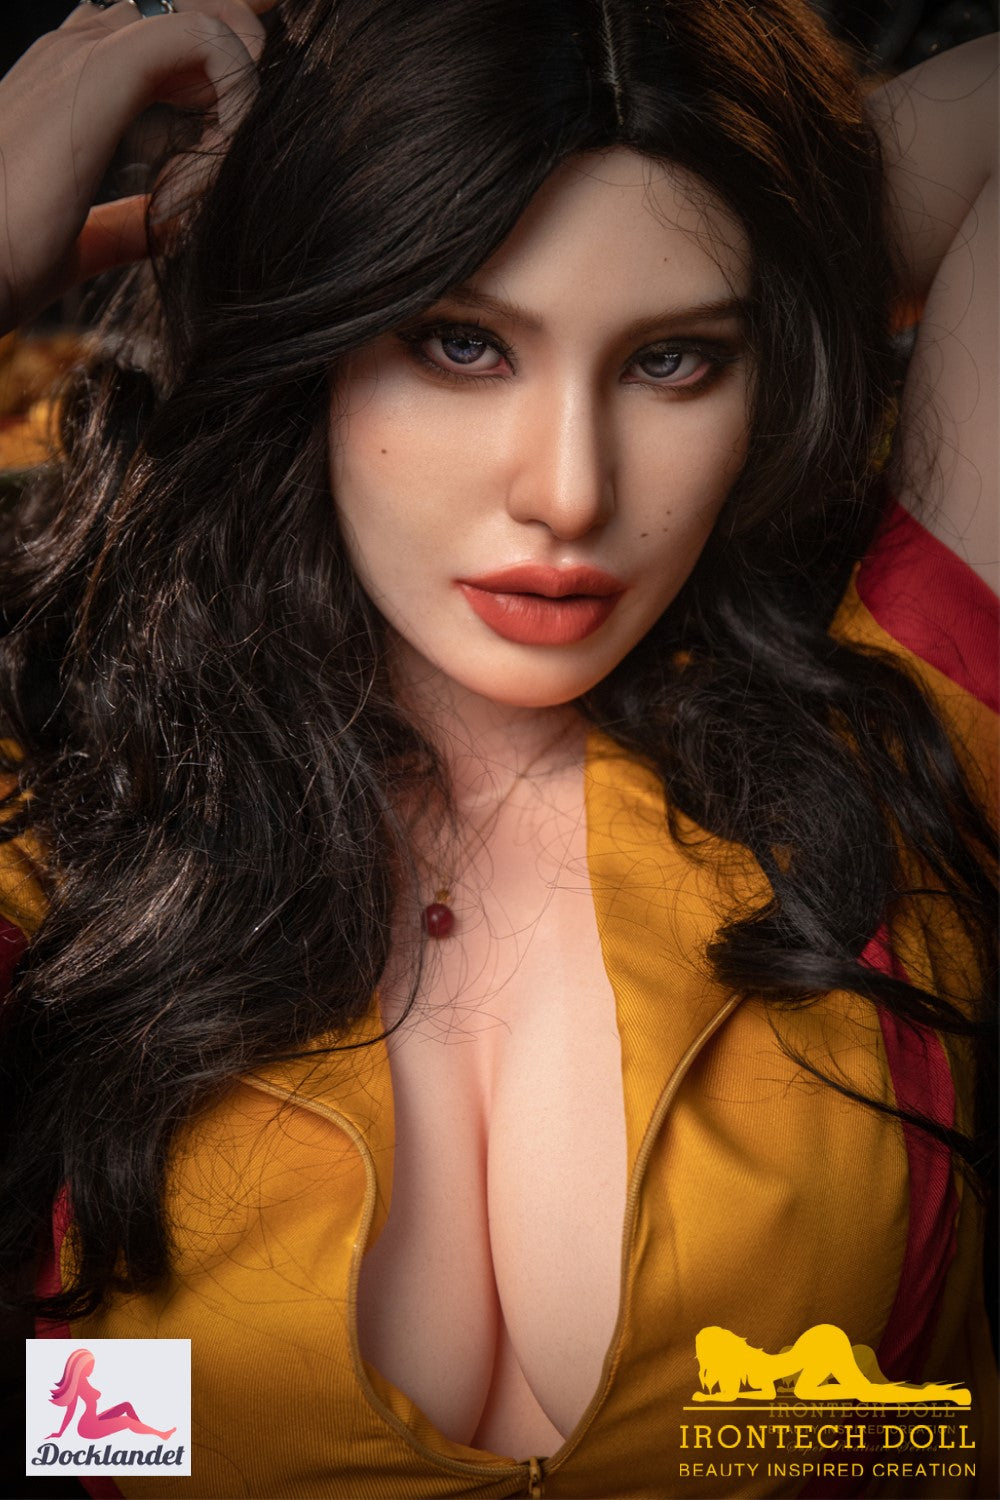 Jackie Sex Doll (Irontech Doll 164cm e-cup S19 Silikon)